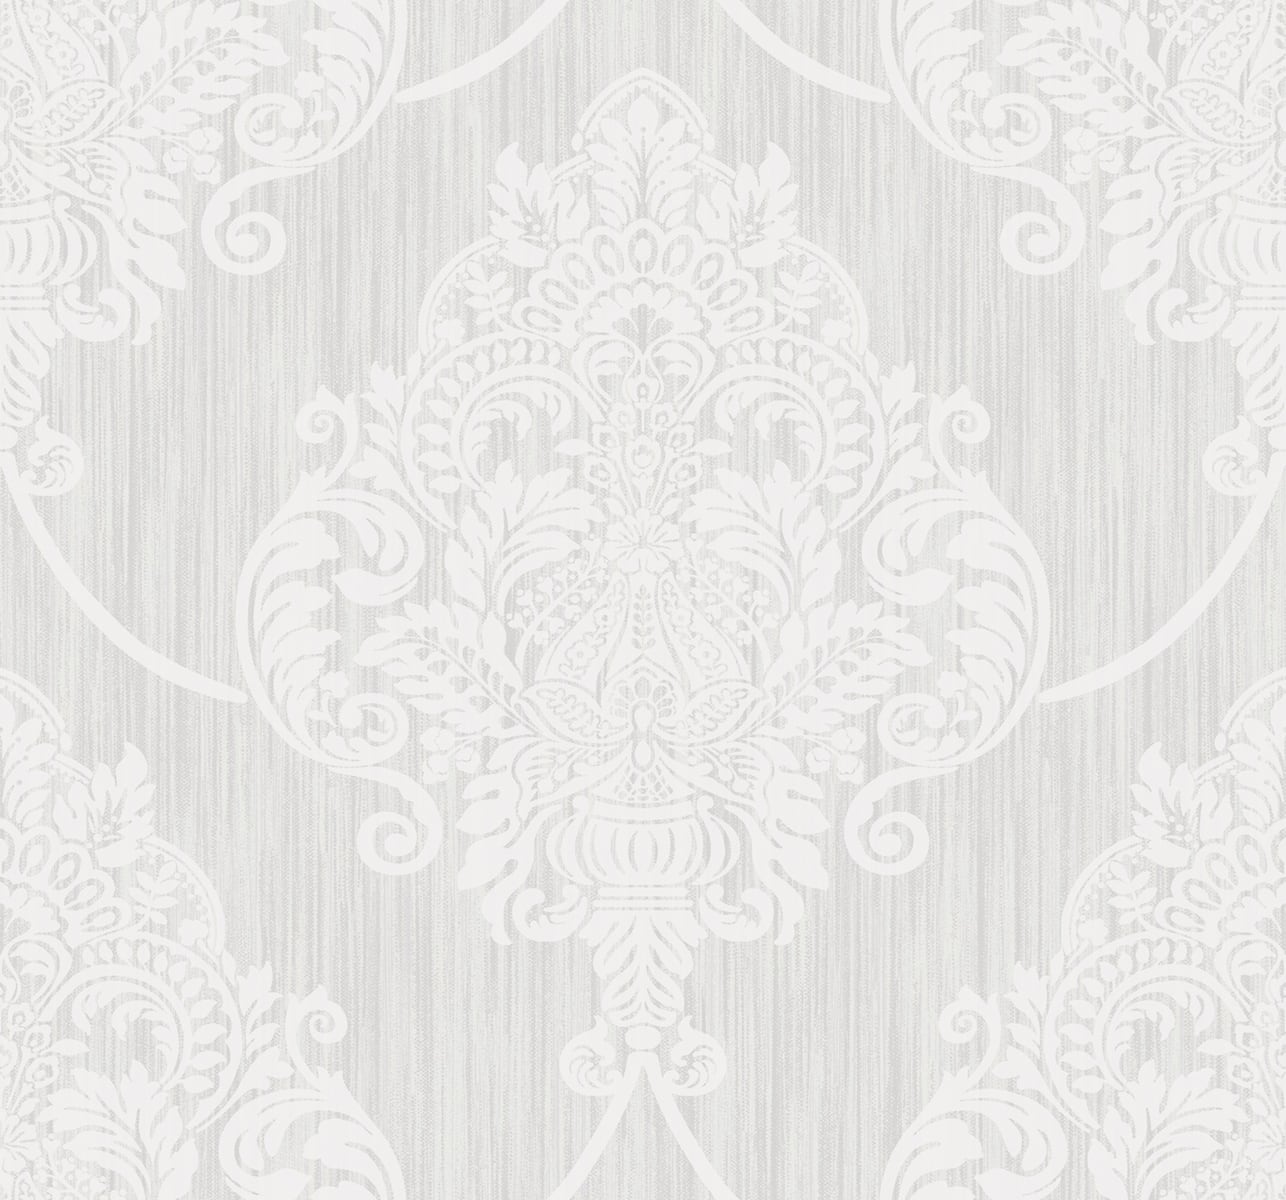 Seabrook Designs AW70800 Casa Blanca 2 Puff Damask  Wallpaper Silver Glitter and Off-White